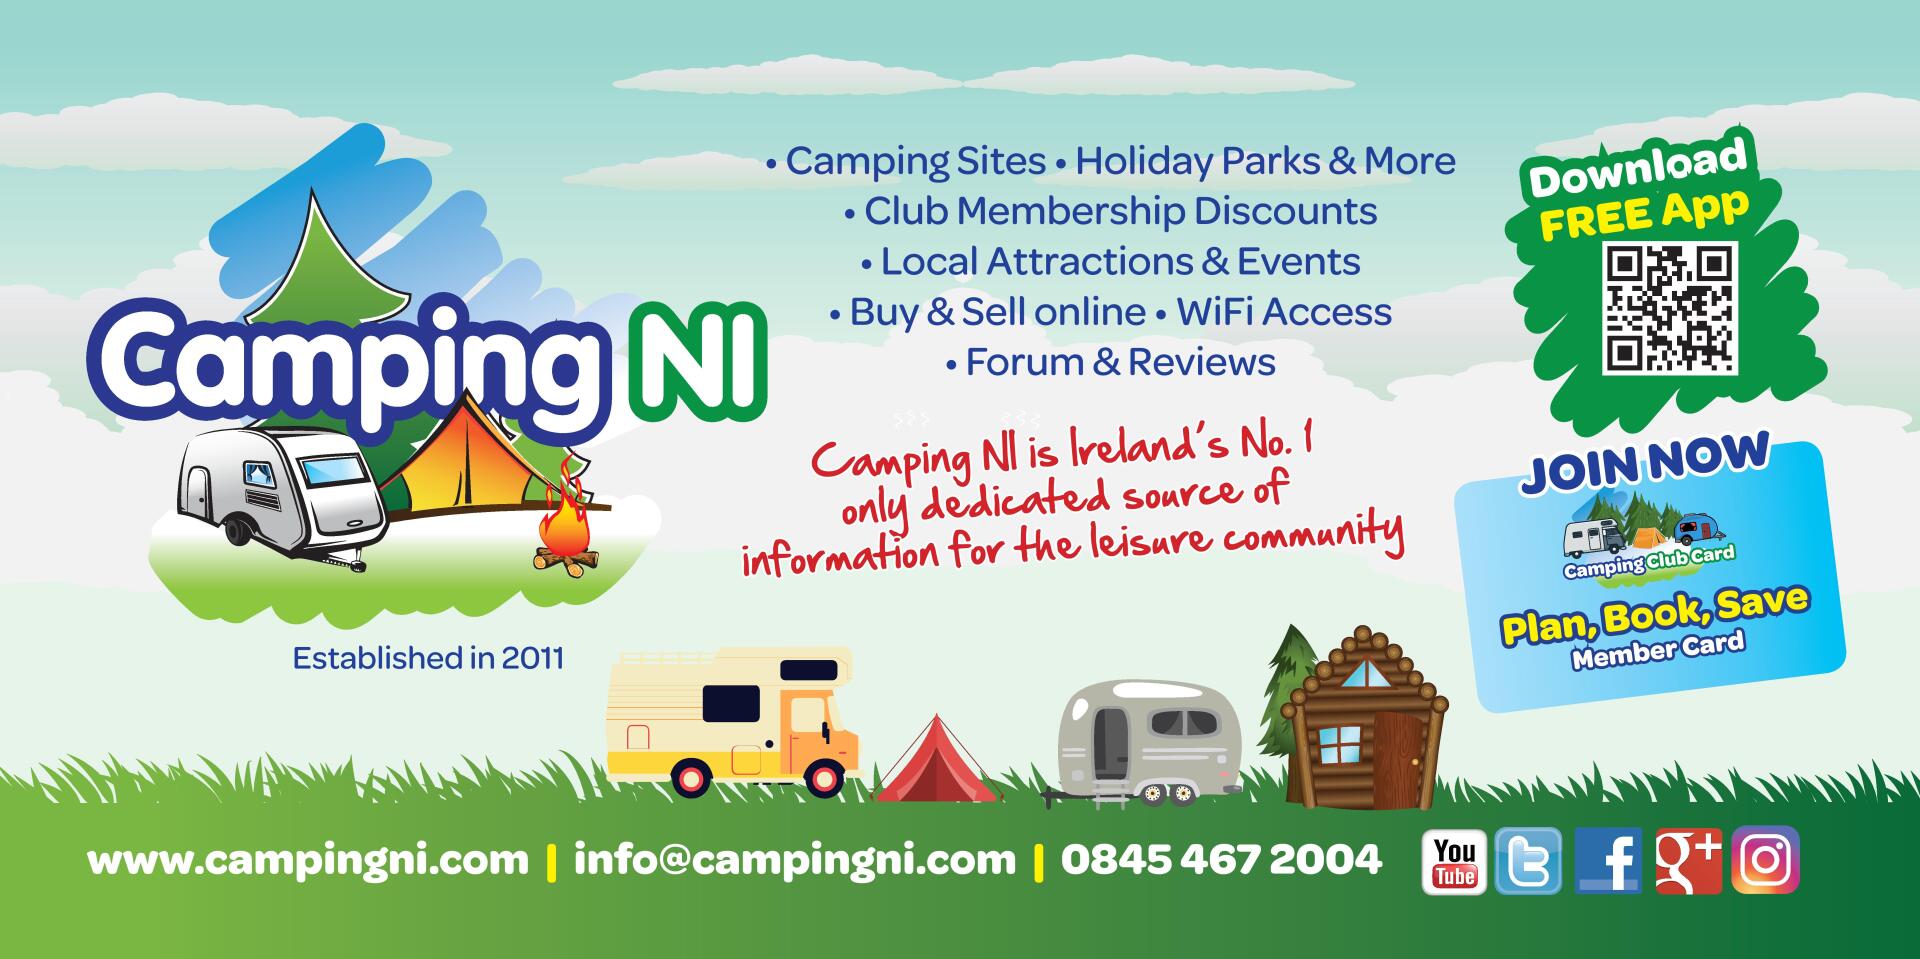 Join CampingNI for £29.99